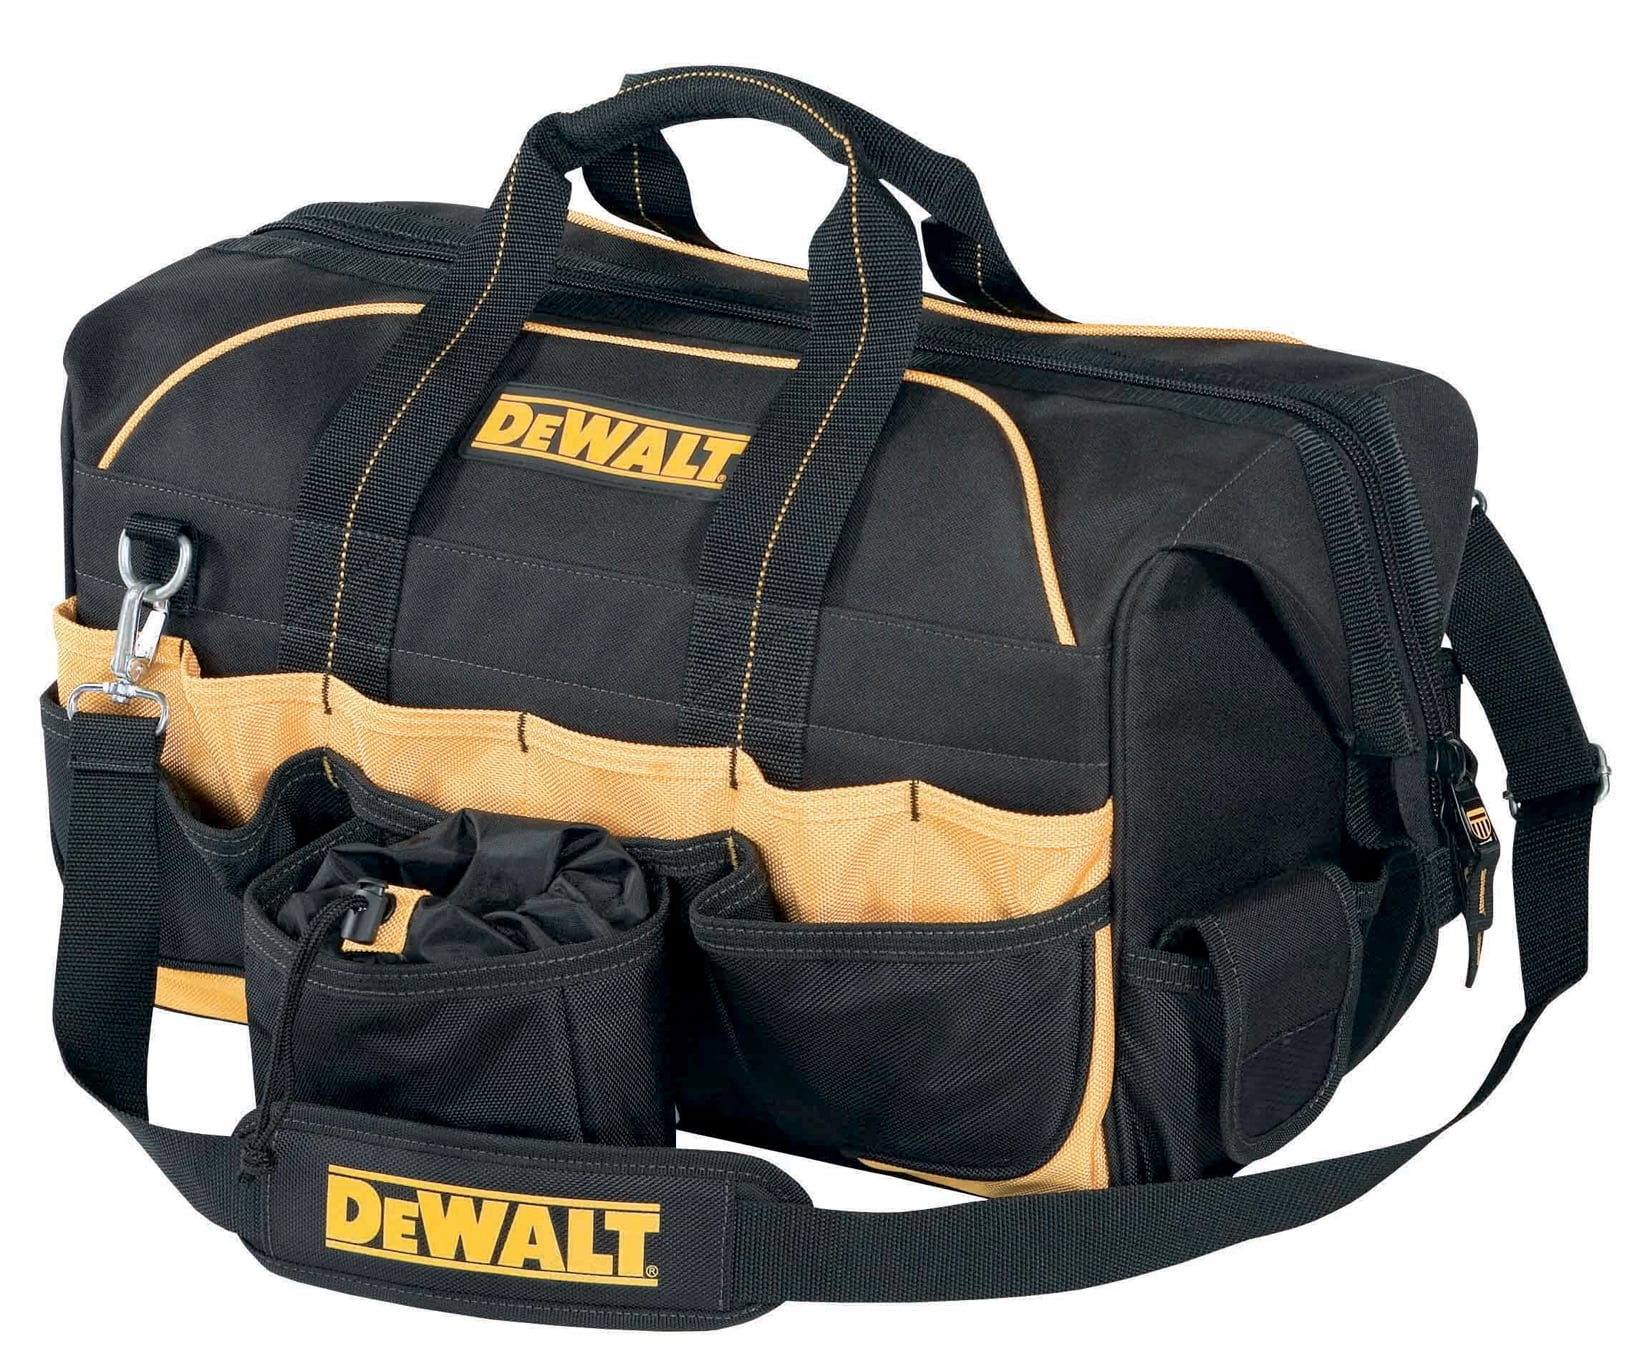 Stanley FatMax Open Mouth Tool Bag, 18